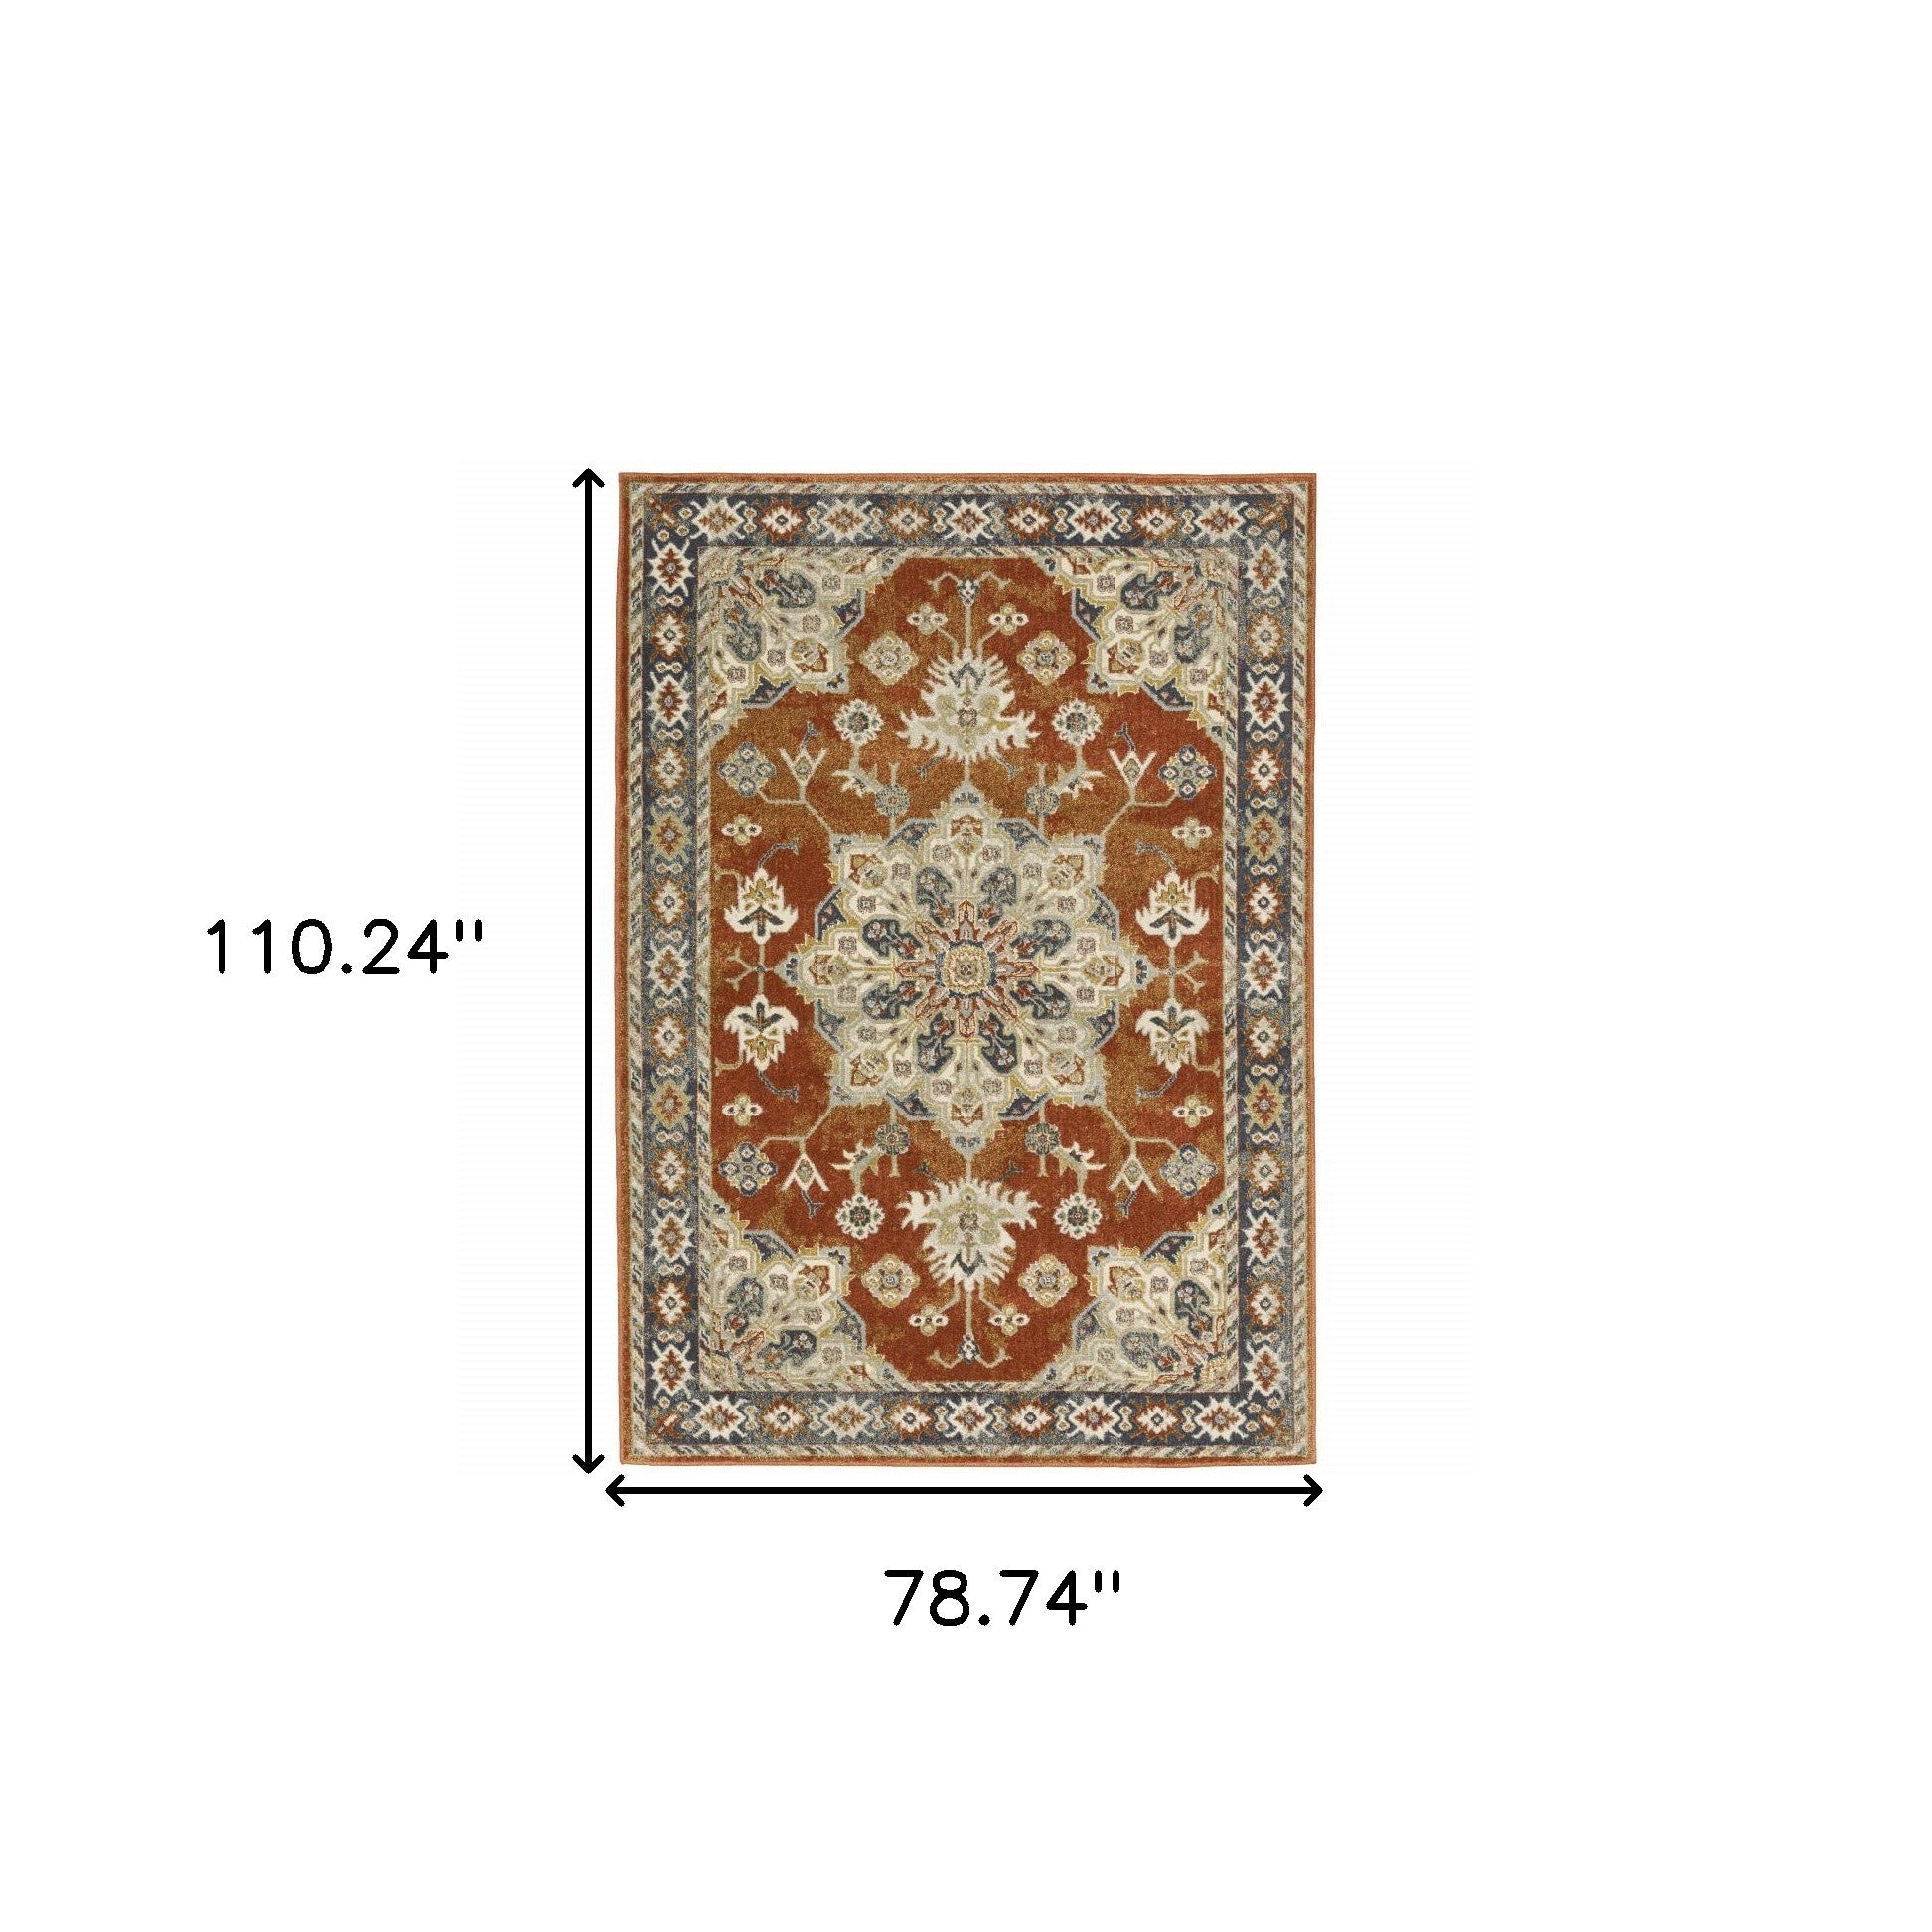 6' X 9' Rust Beige Teal Blue And Gold Oriental Power Loom Stain Resistant Area Rug